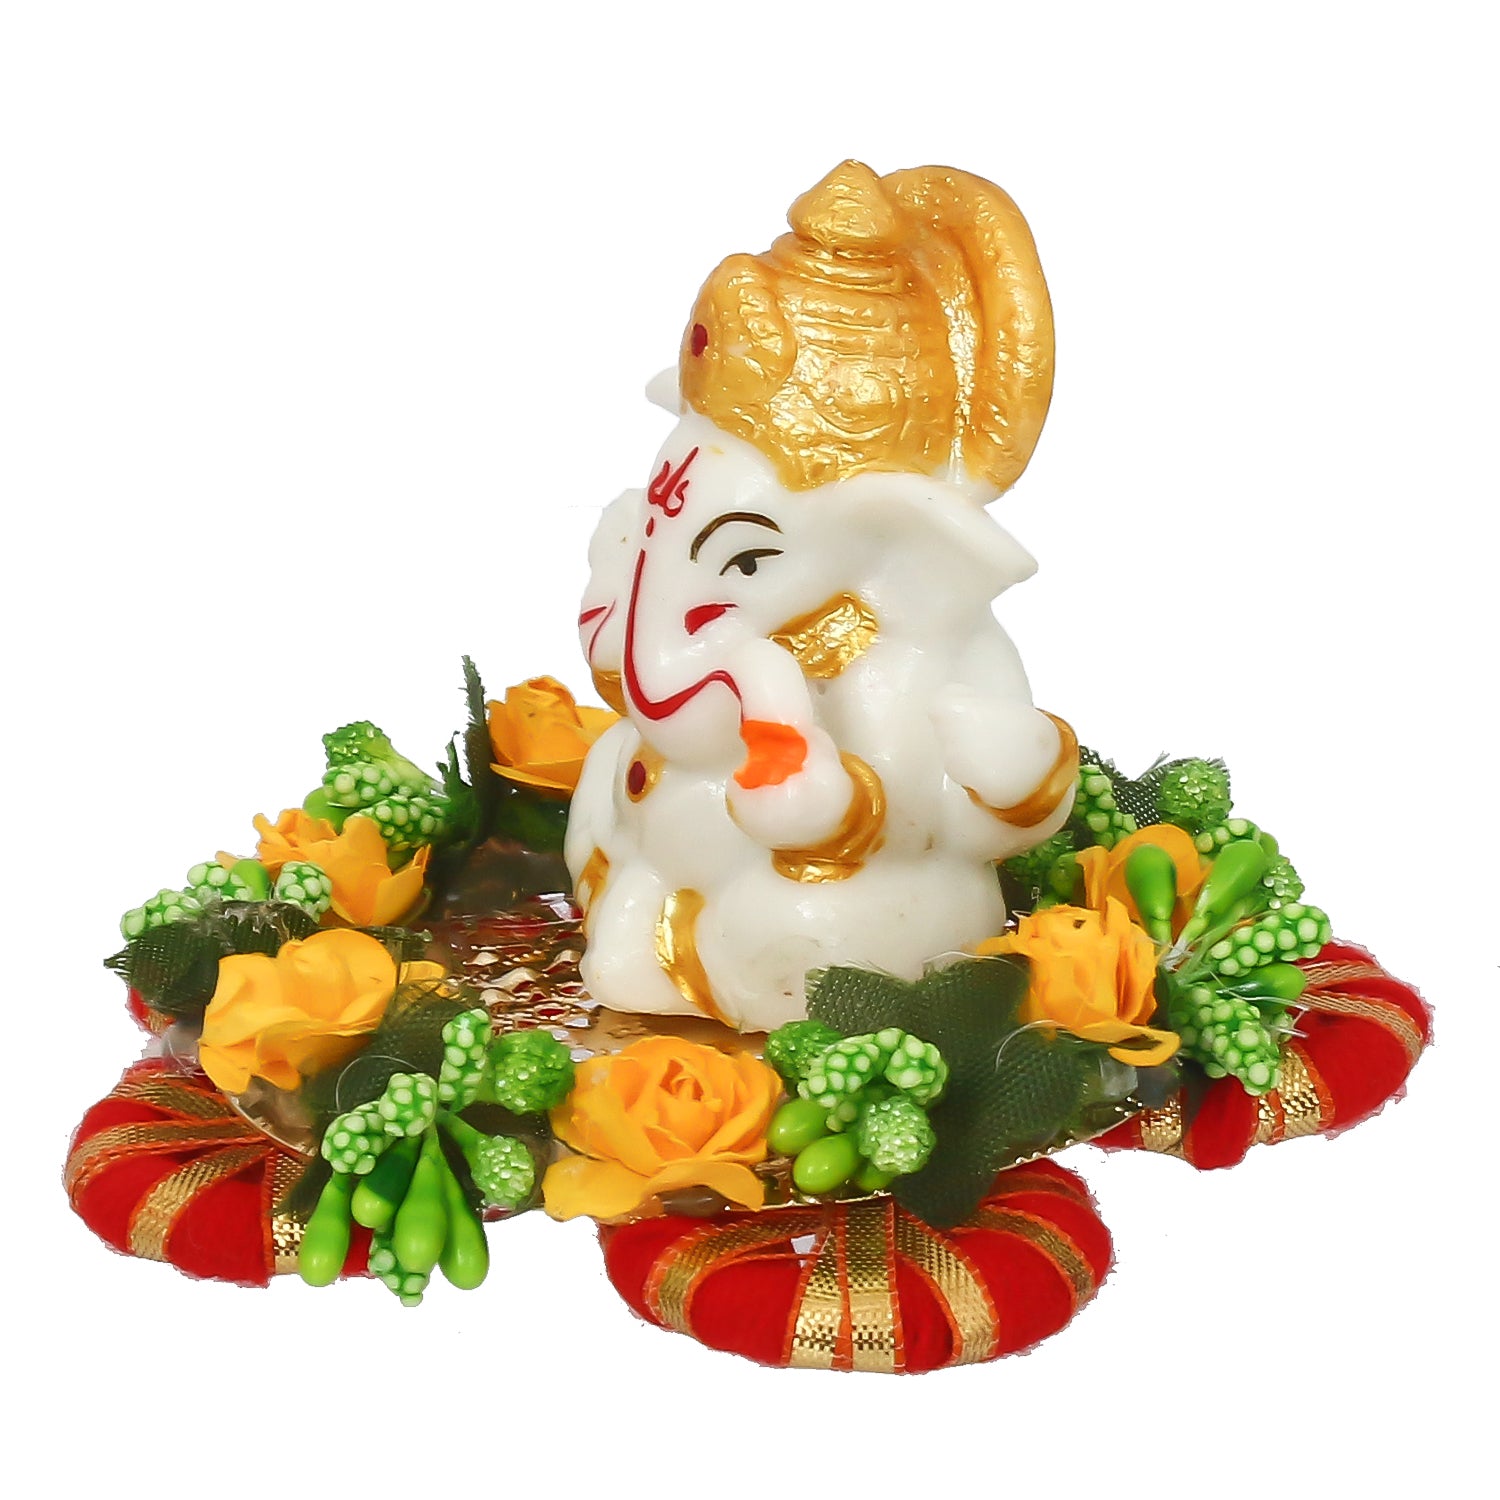 Lord Ganesha Idol On Decorative Handicrafted Plate For Home And Car Dashboard 4